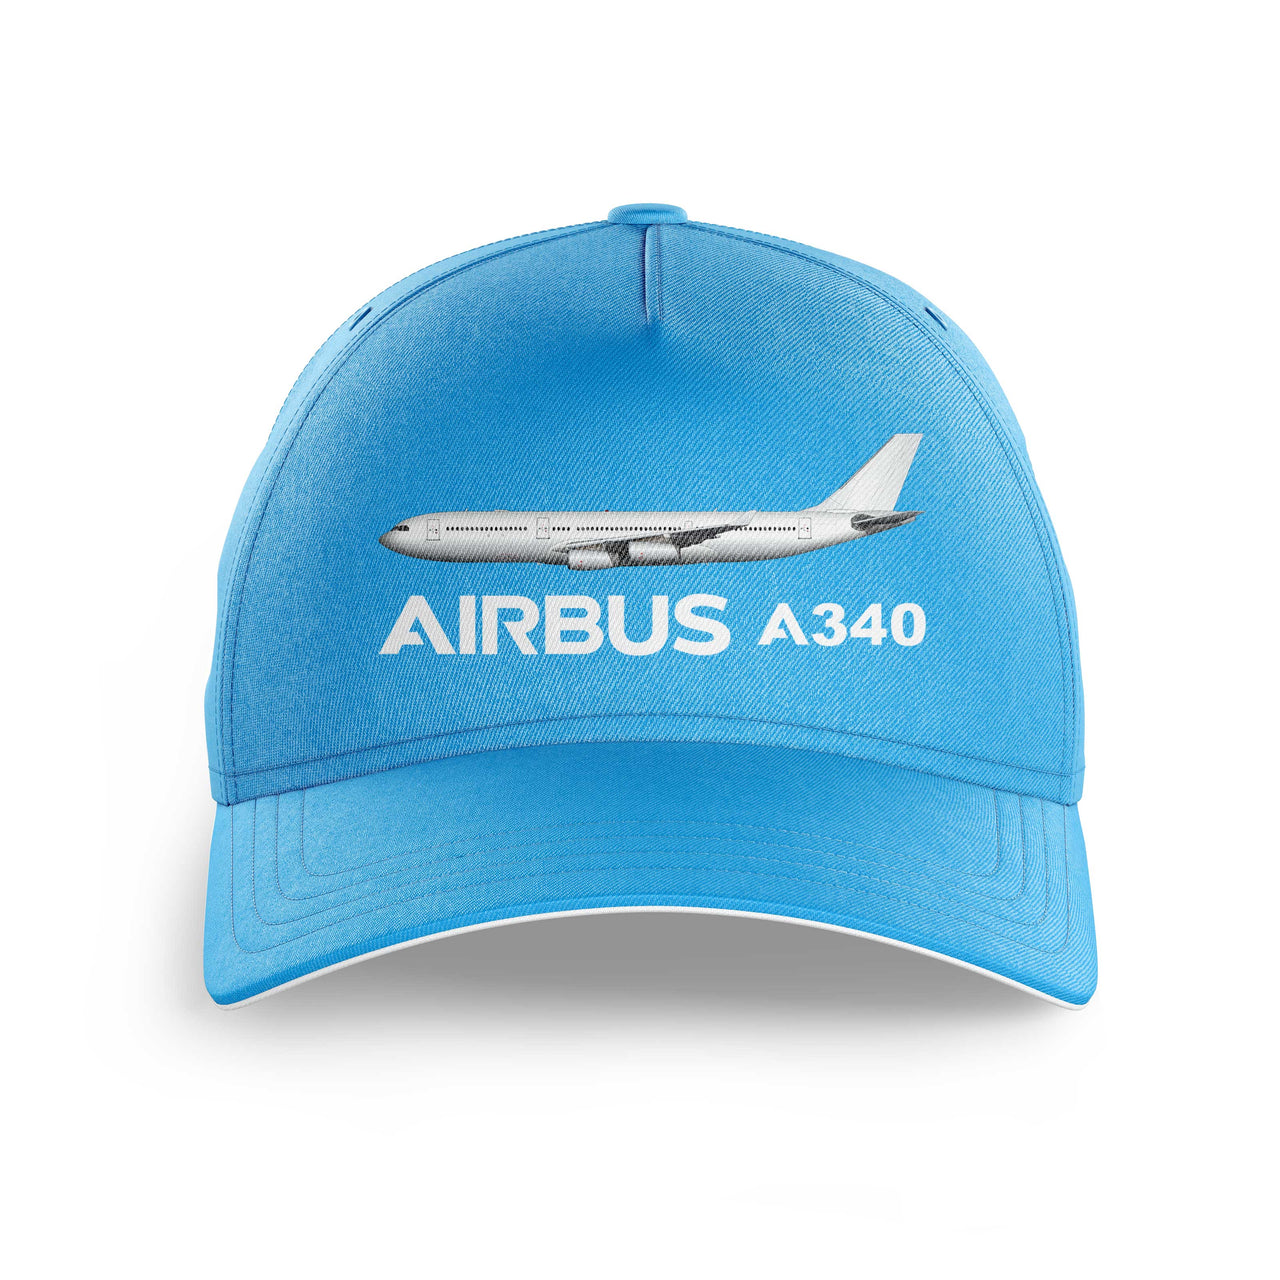 The Airbus A340 Printed Hats